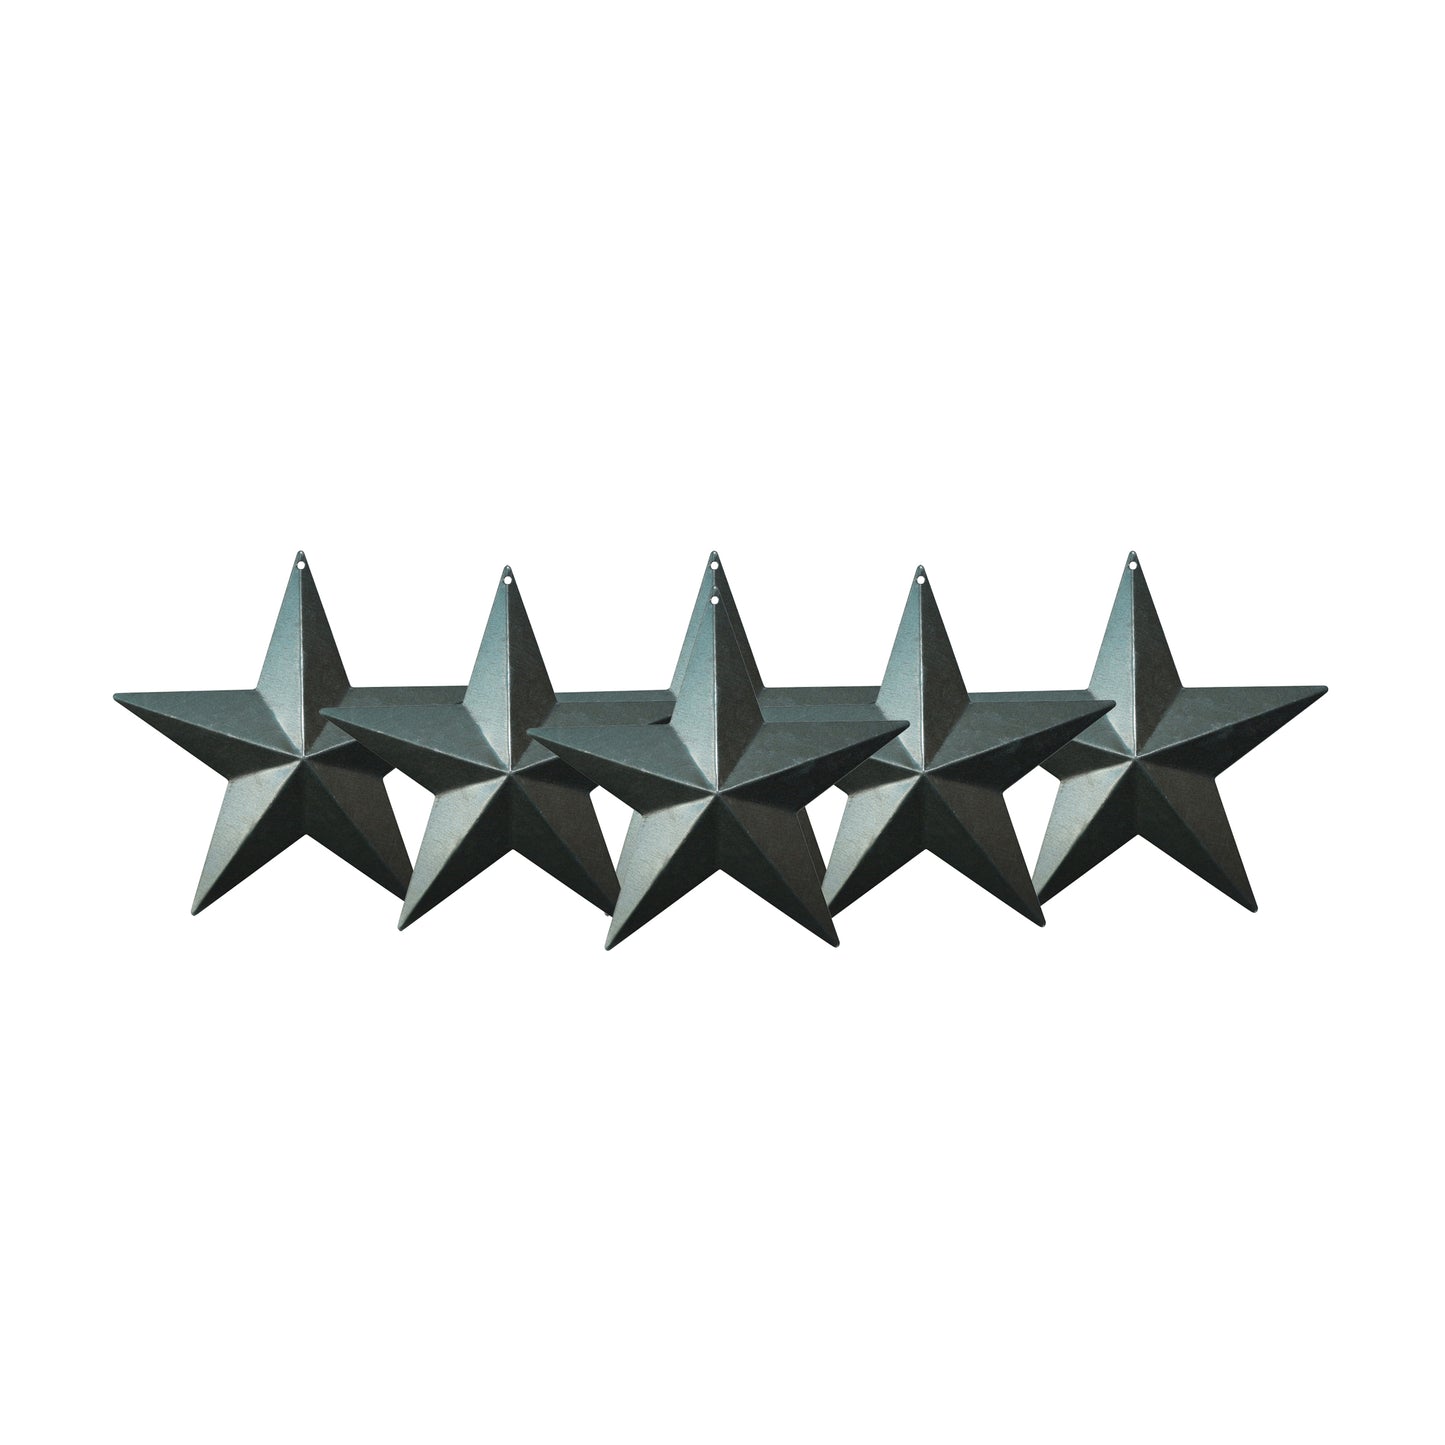 CVHOMEDECO. Country Rustic Antique Vintage Gifts Grungy Desert Sage Metal Barn Star Wall/Door Decor, 4 Inch, Set of 6.